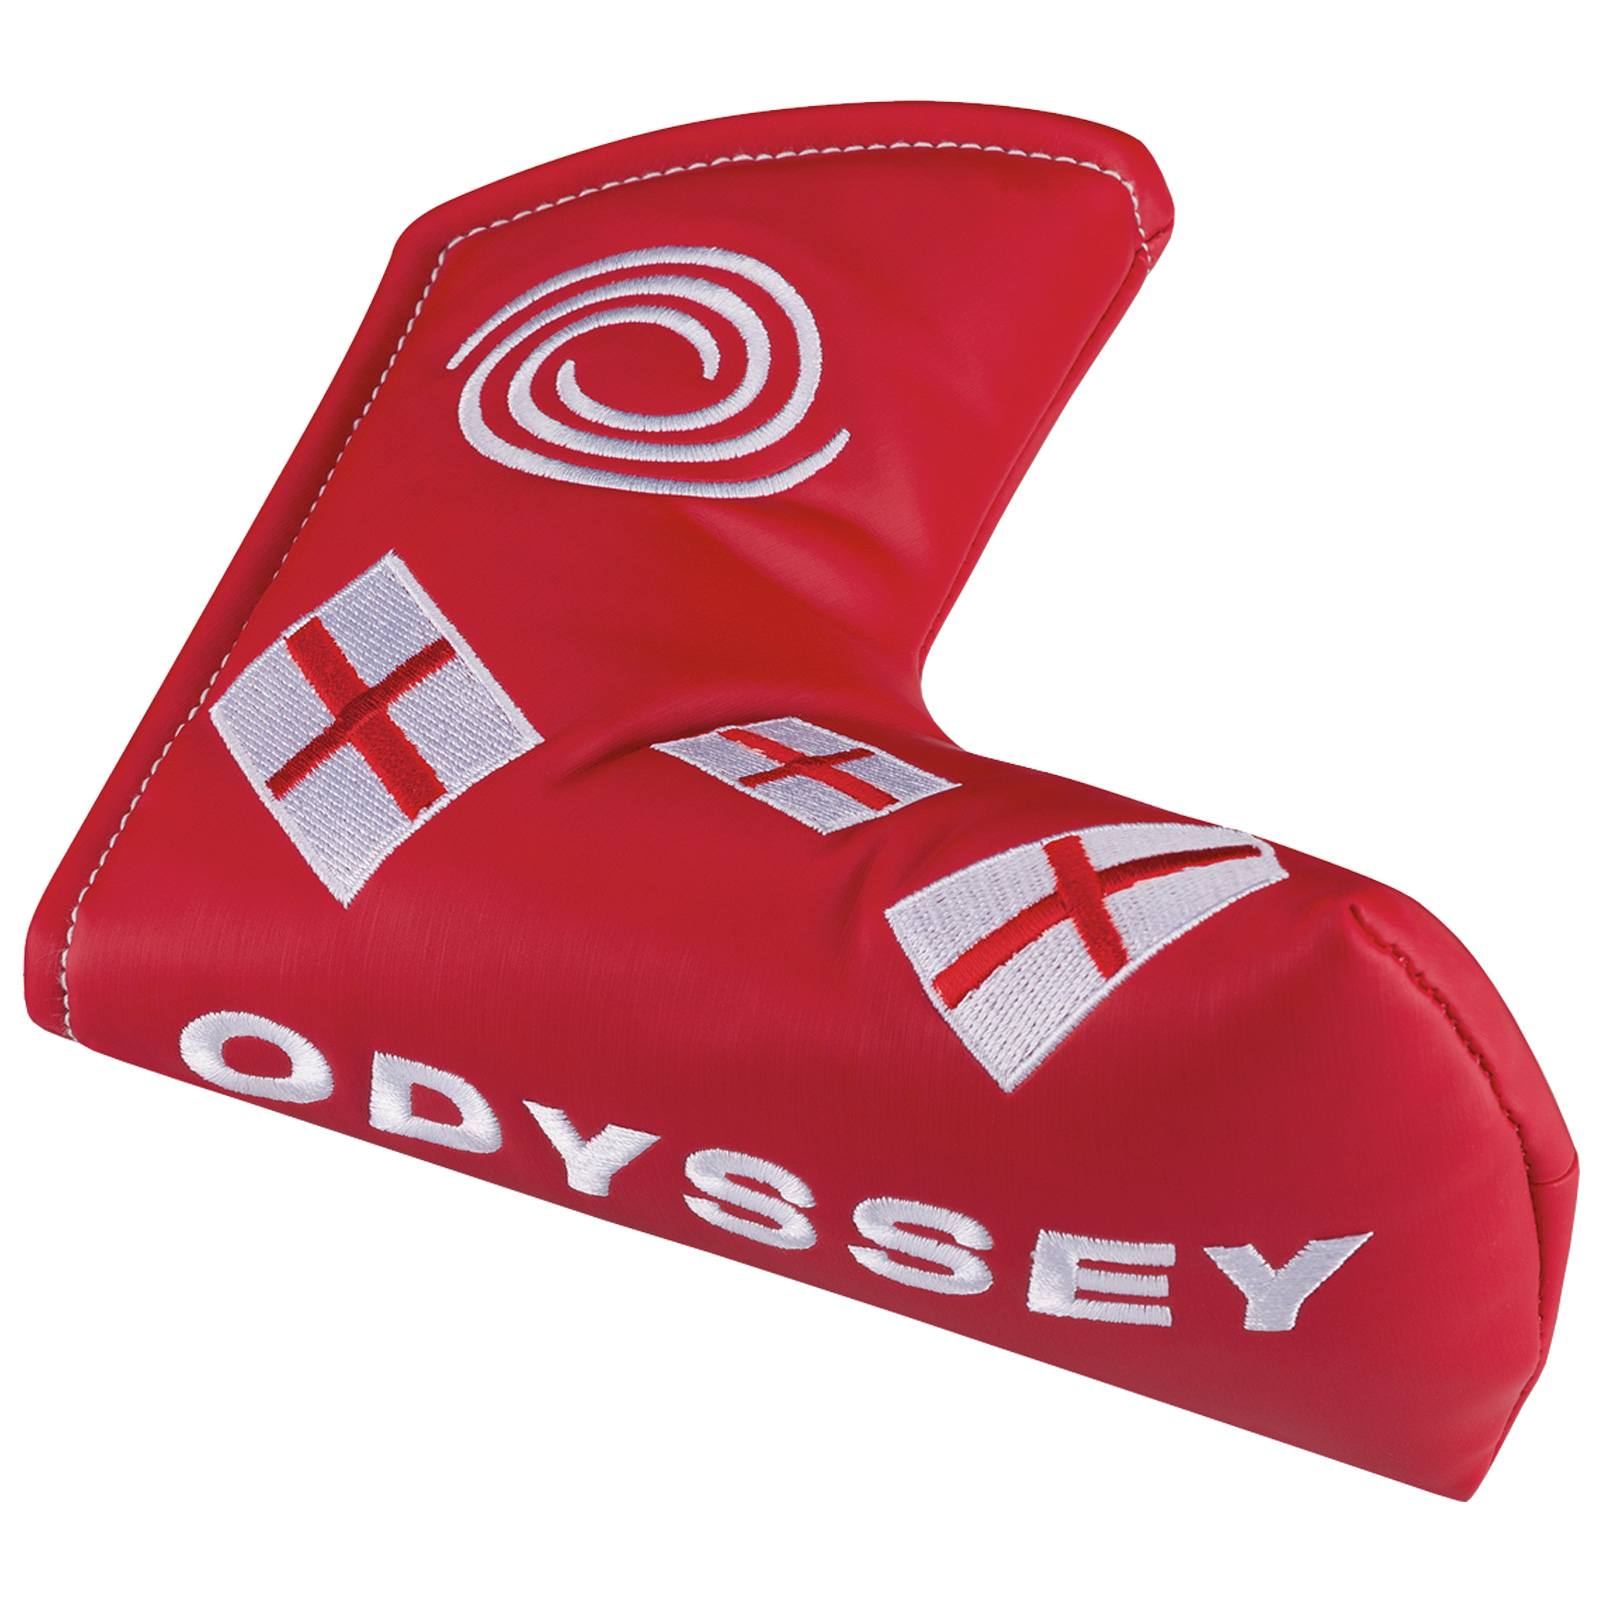 odyssey putter head cover